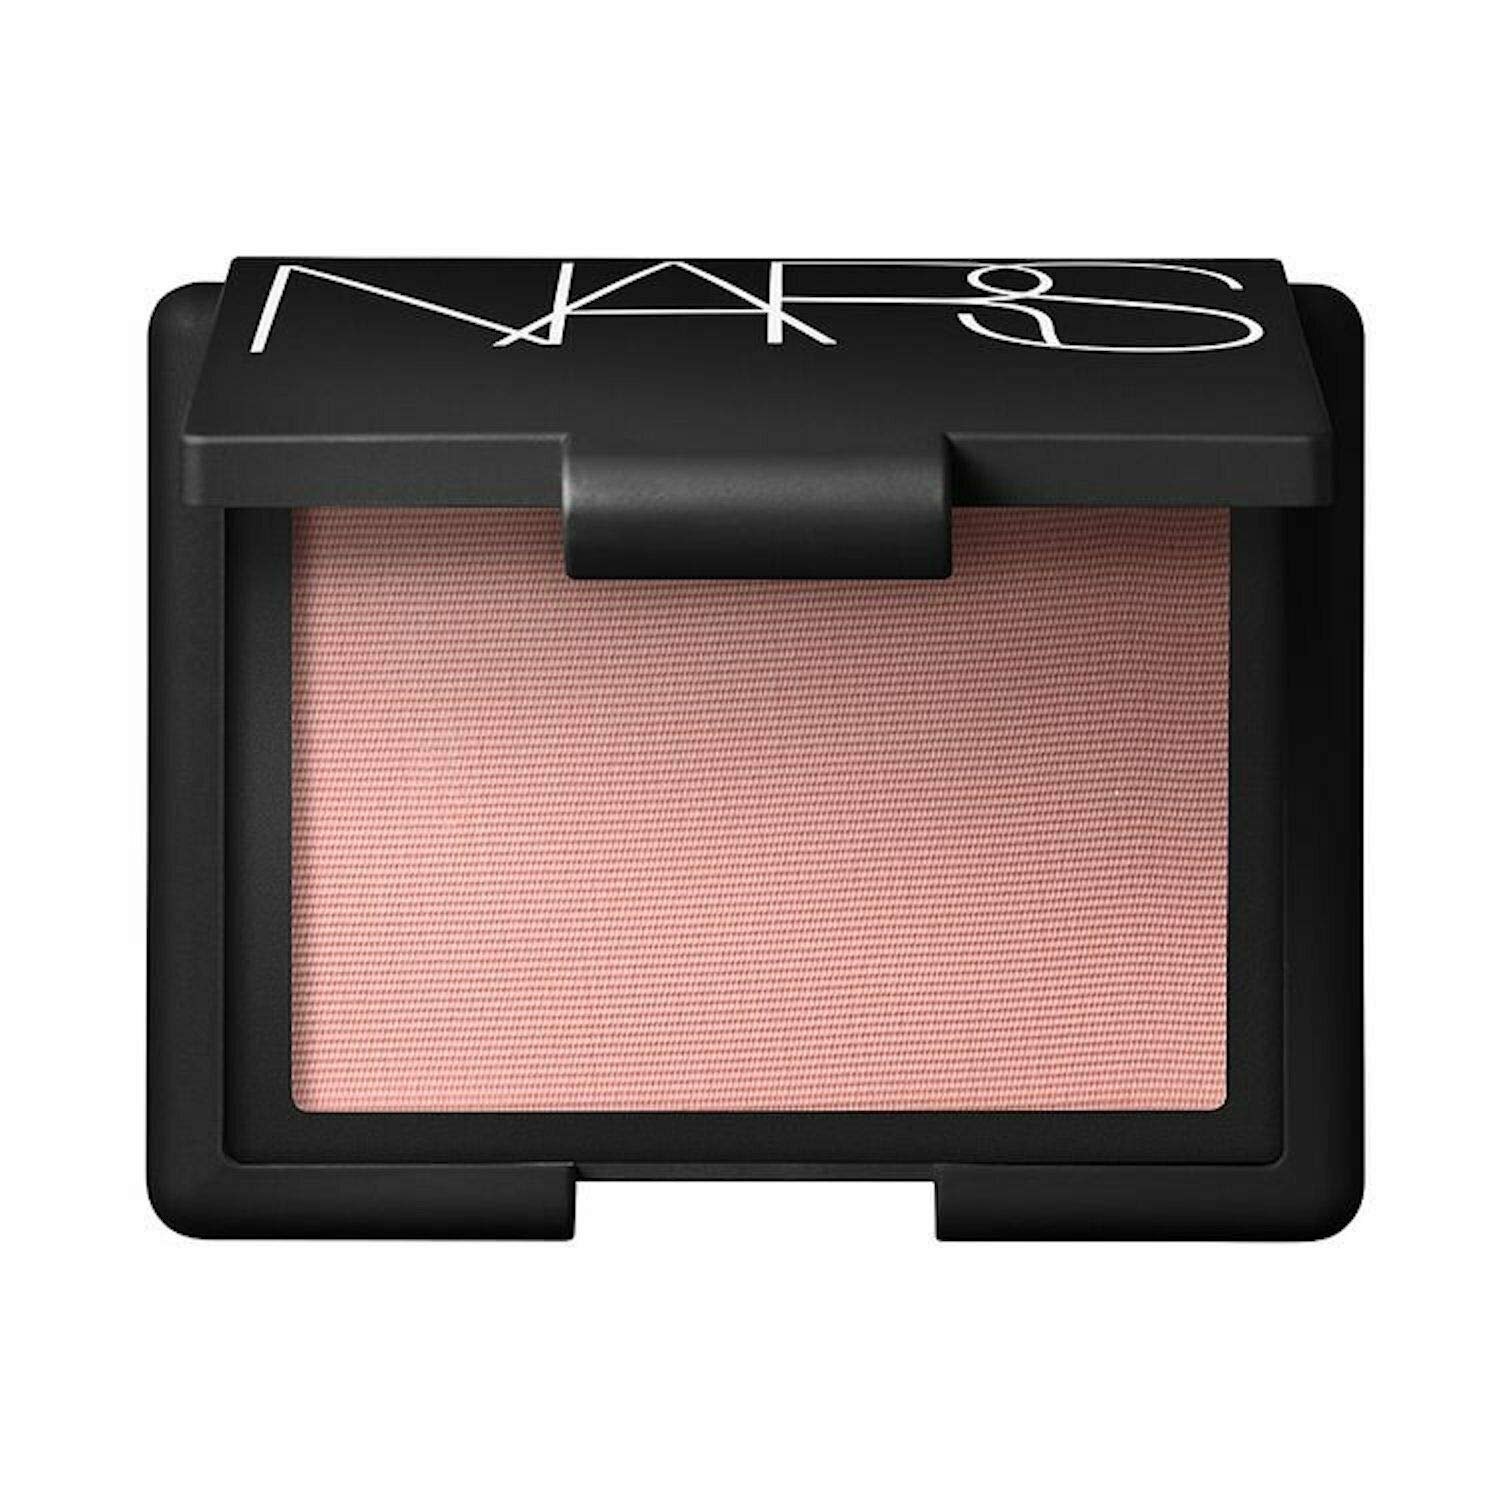 NARS Orgasm Blush - Peachy Pink with Golden Shimmer - HOLIDAY Limited Edition - for All Skintones - 